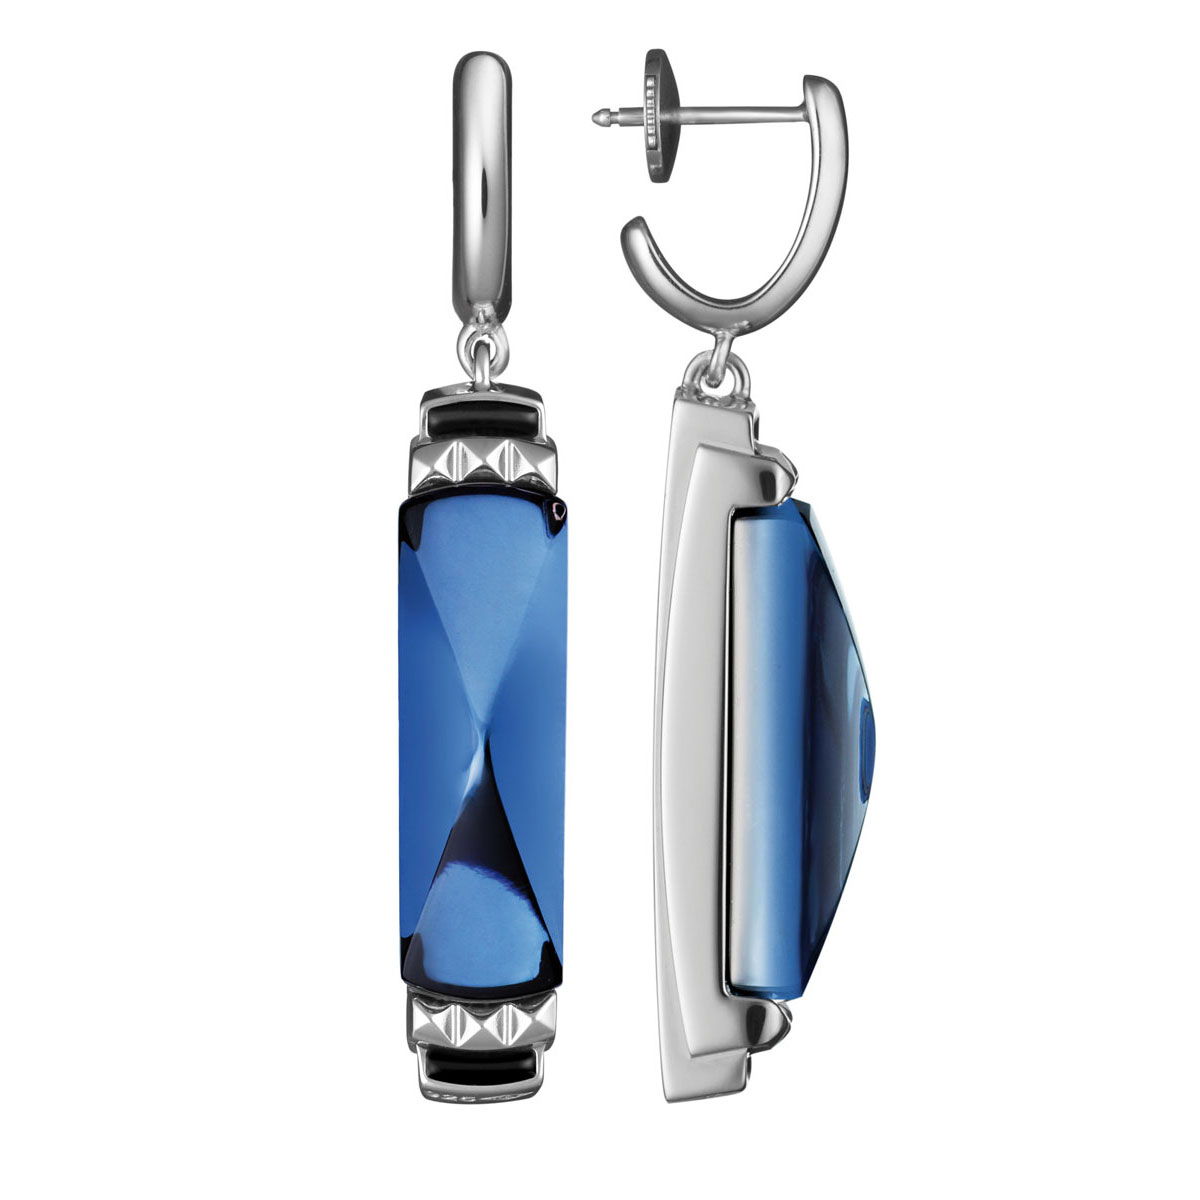 Baccarat Crystal Louxor Earrings, Silver and Blue Mordore